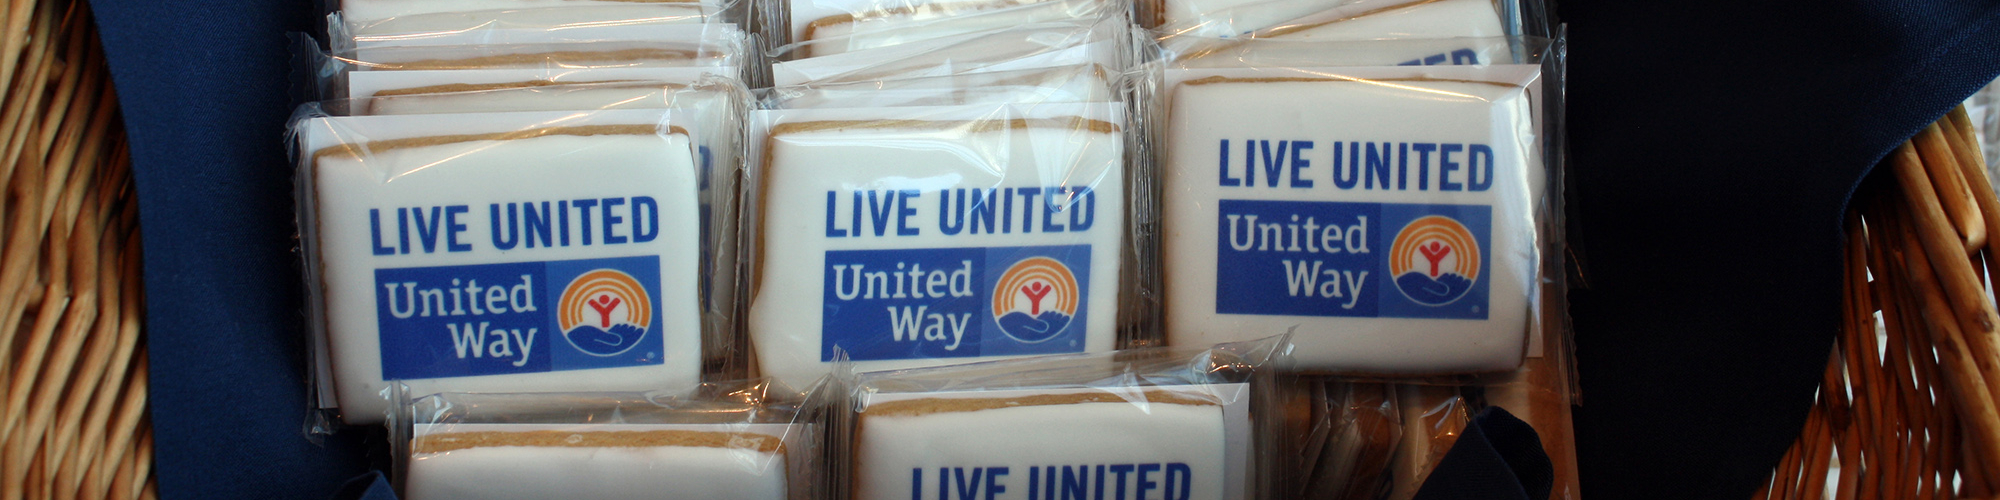 United Way iced cookies in a basket